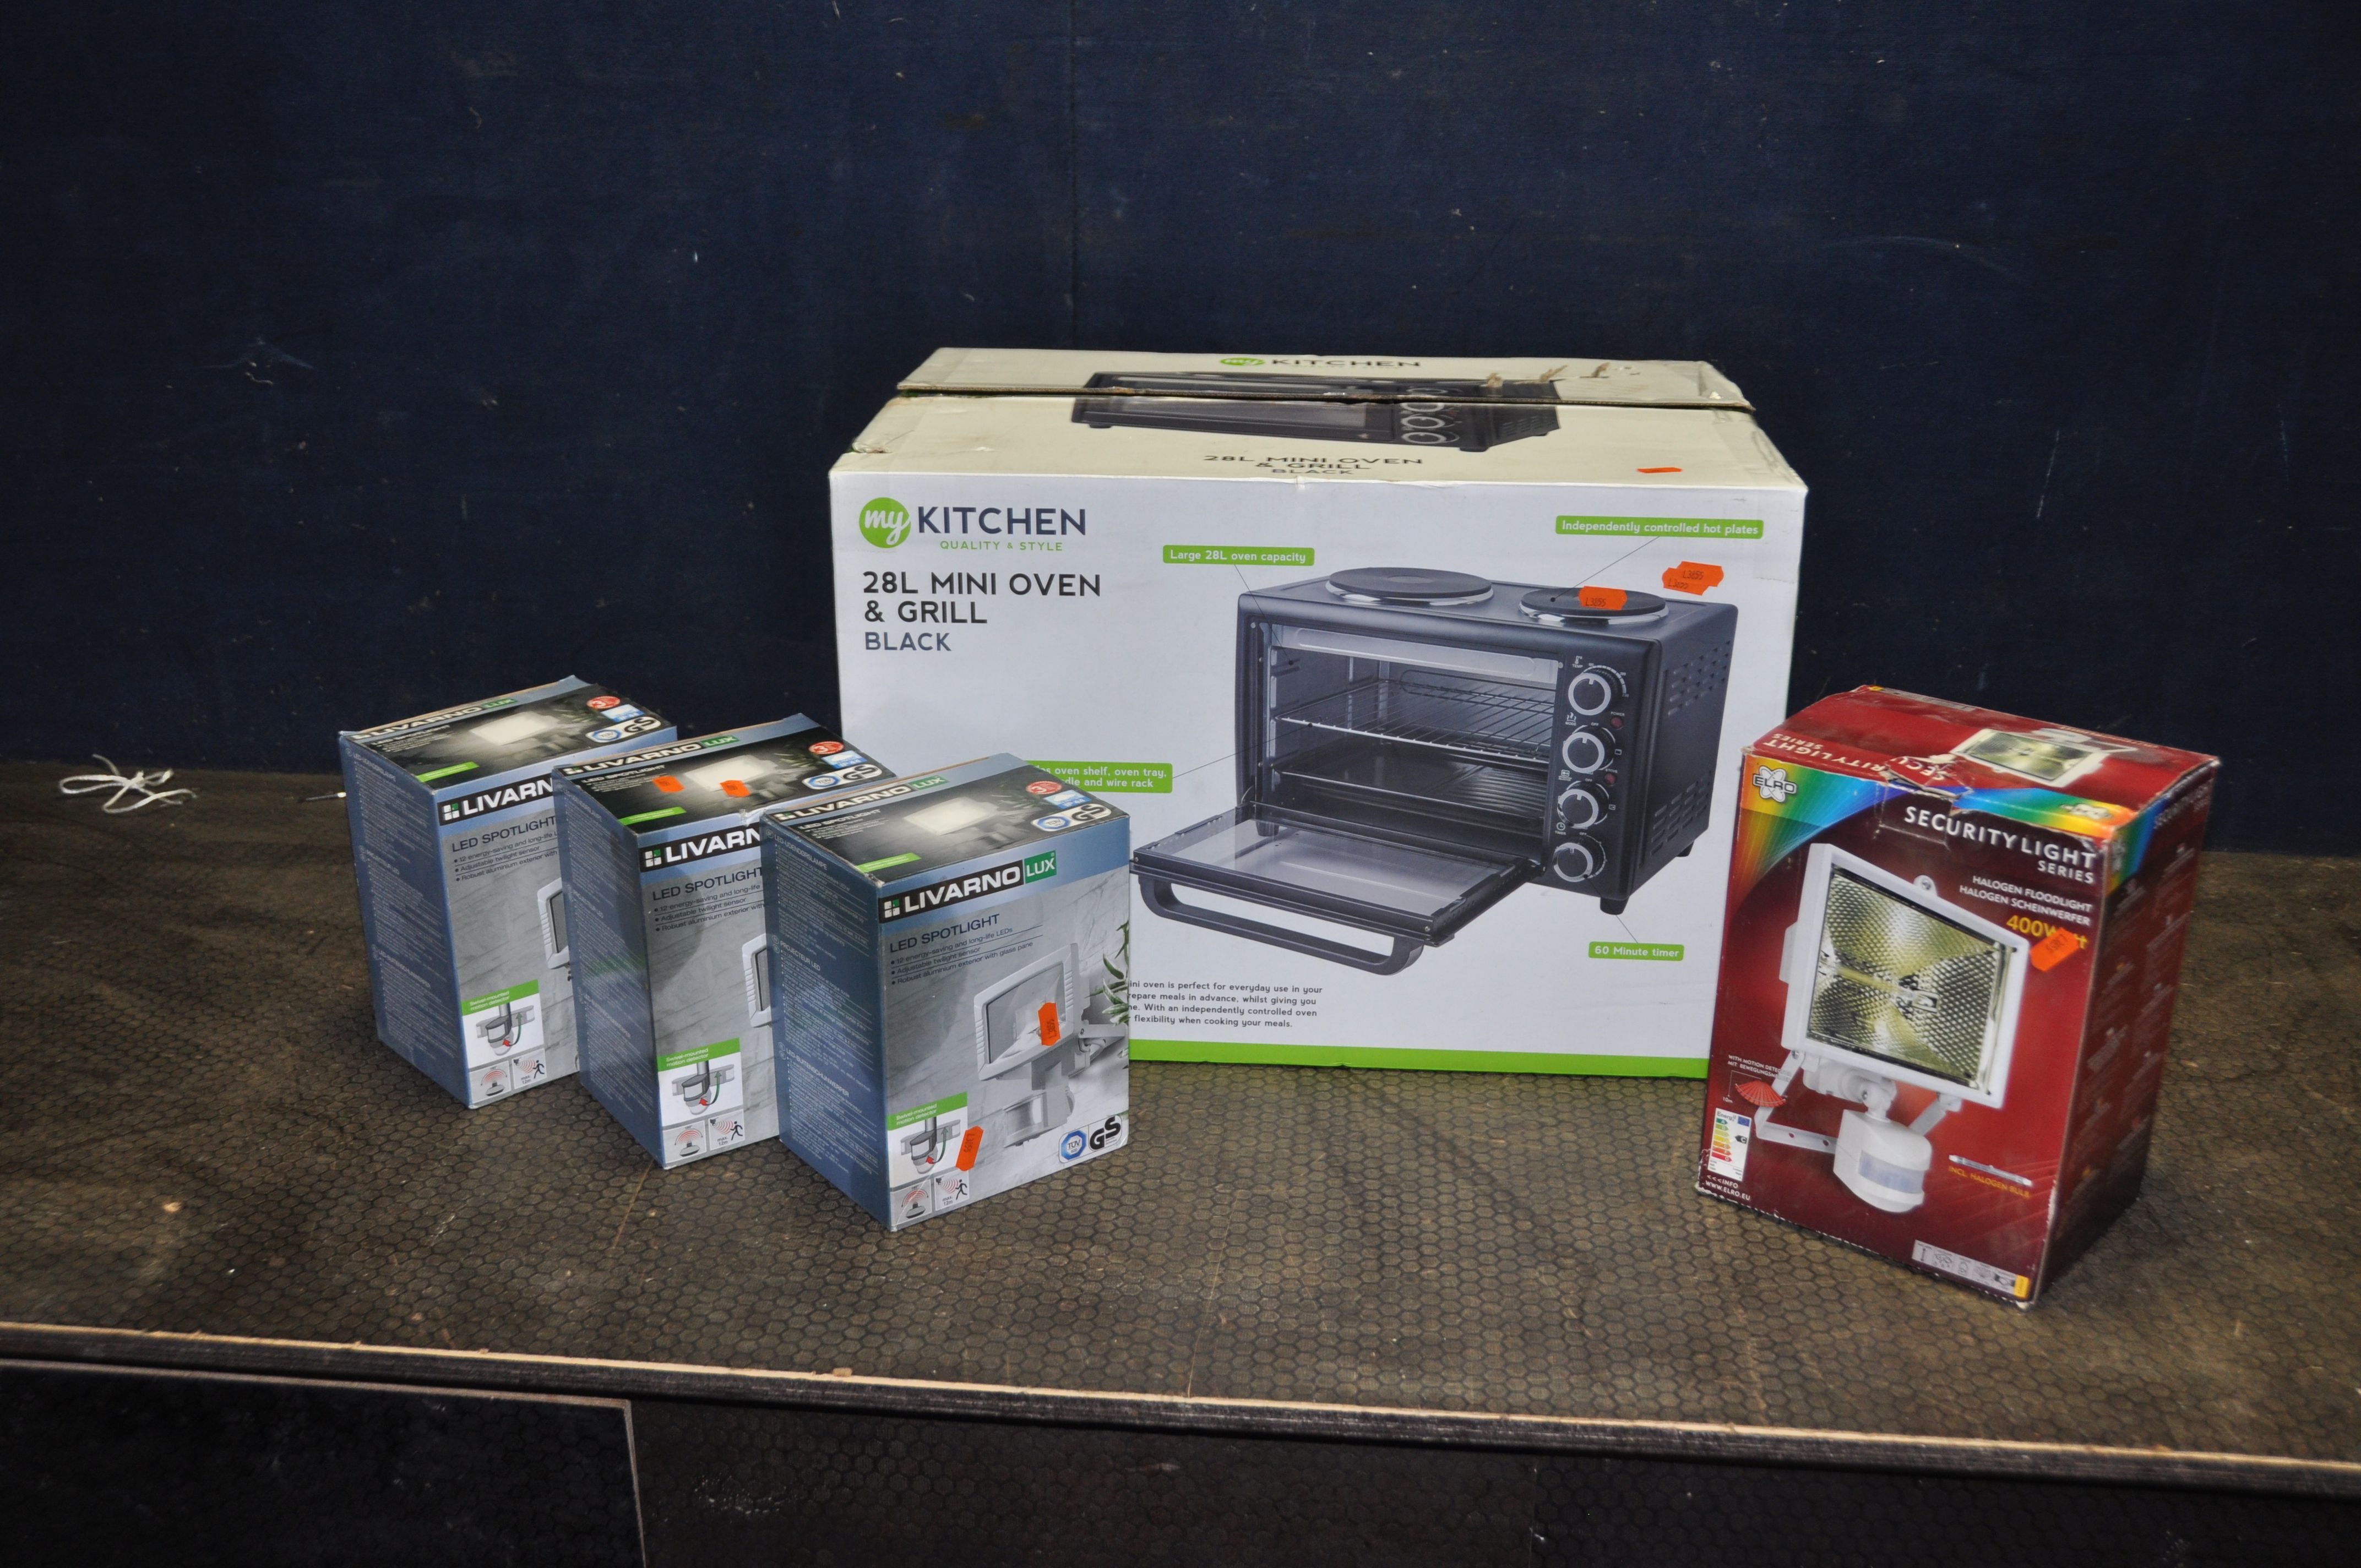 A 'MY KITCHEN' MINI OVEN GRILL brand and still packaged in box, three LED spotlights with PIR and